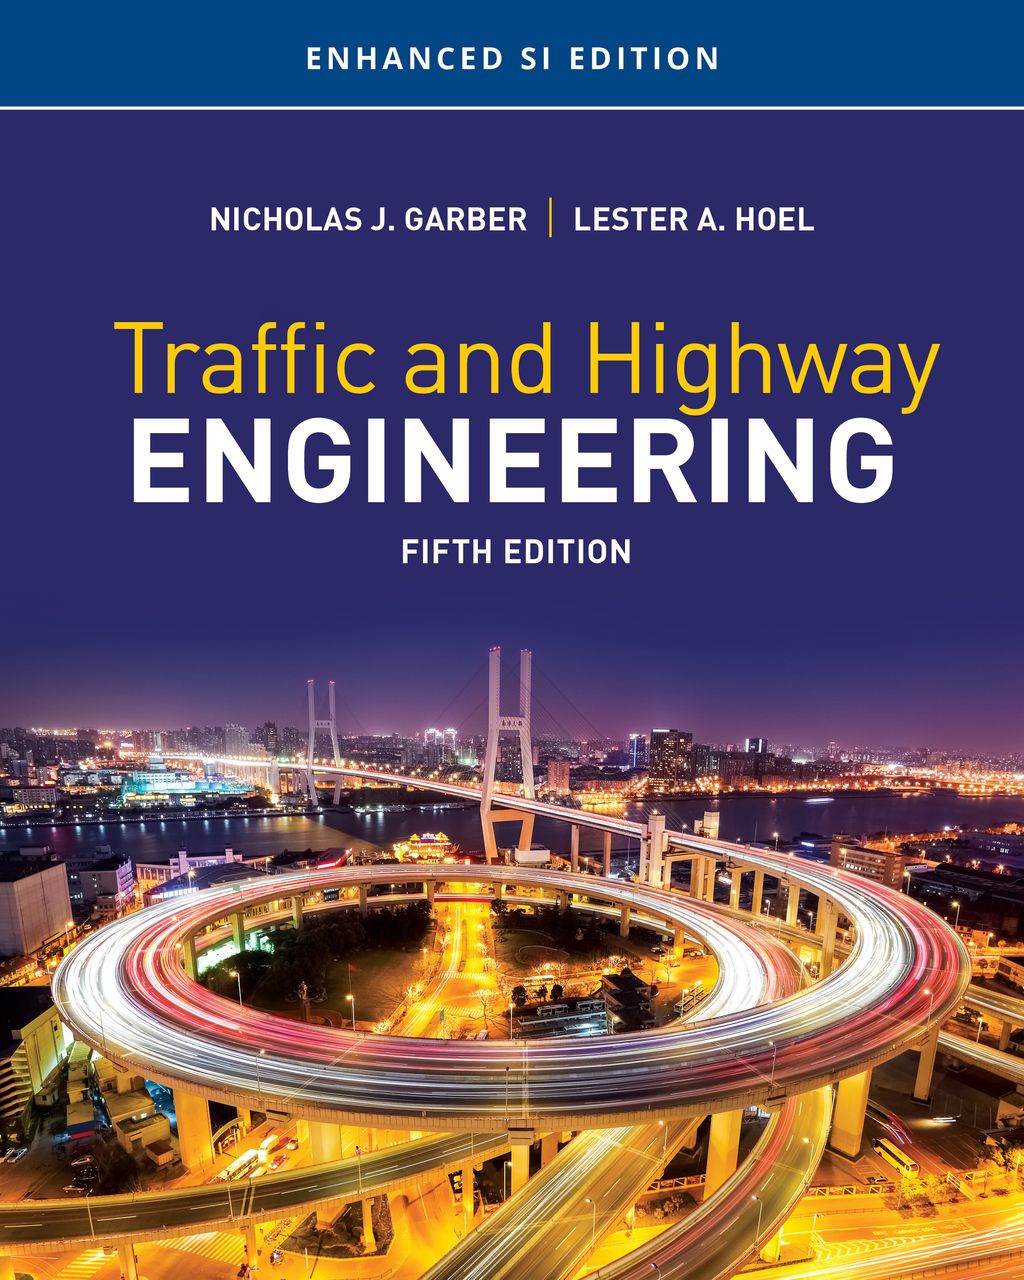 9781337631044 Traffic And Highway Engineering Garber 5E SI.jfif